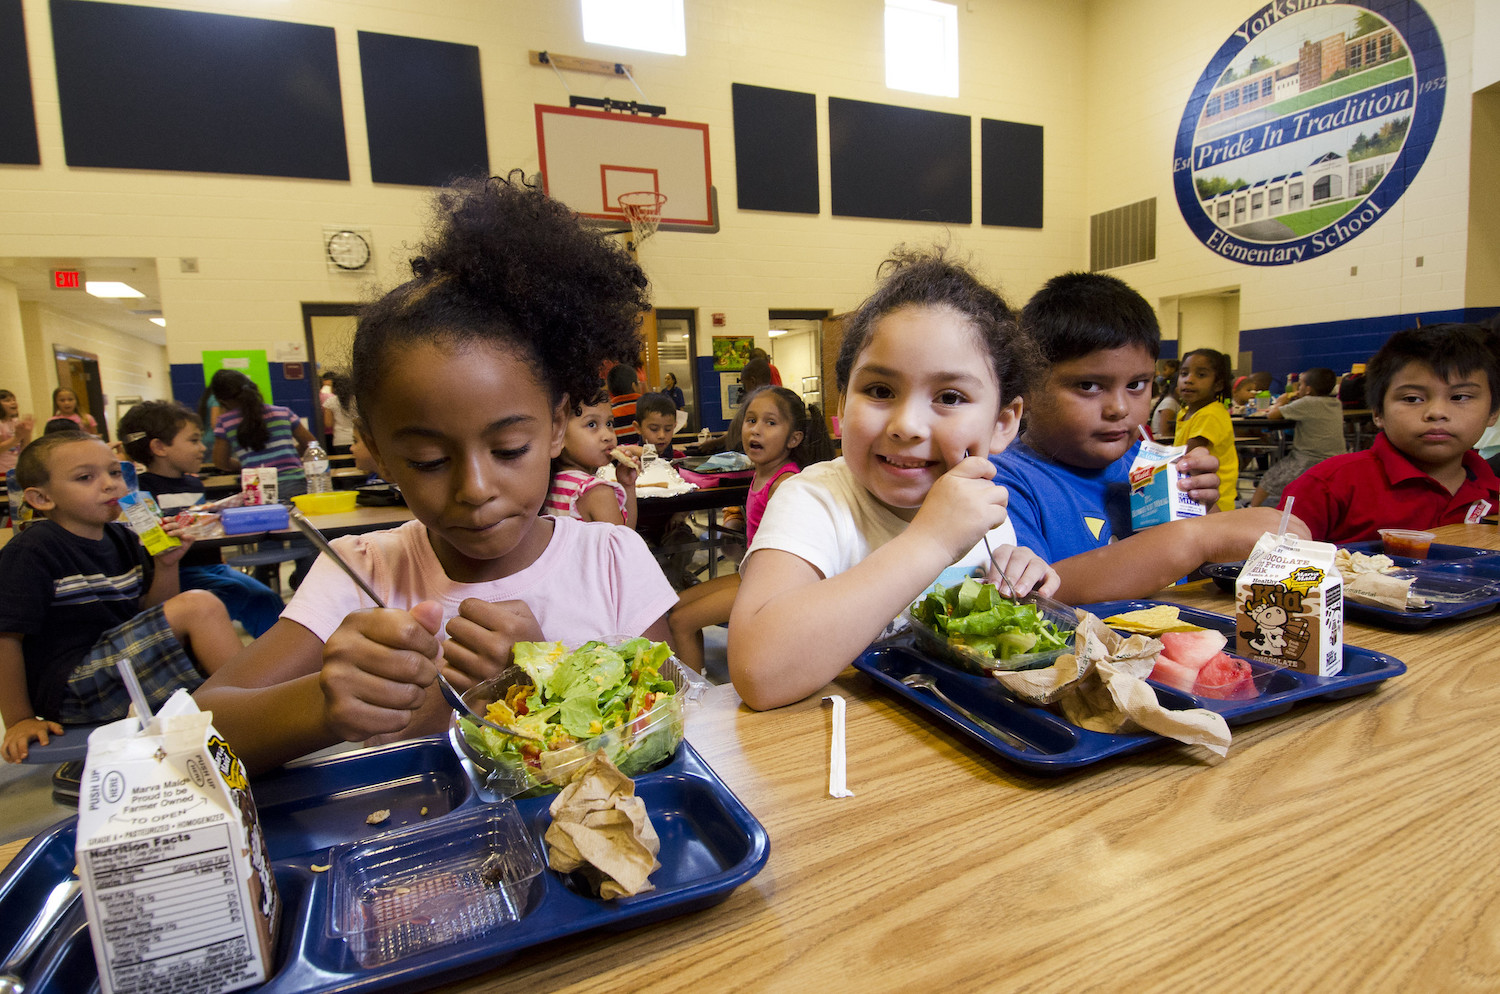 Students eat lunch at an elementary school in Virginia